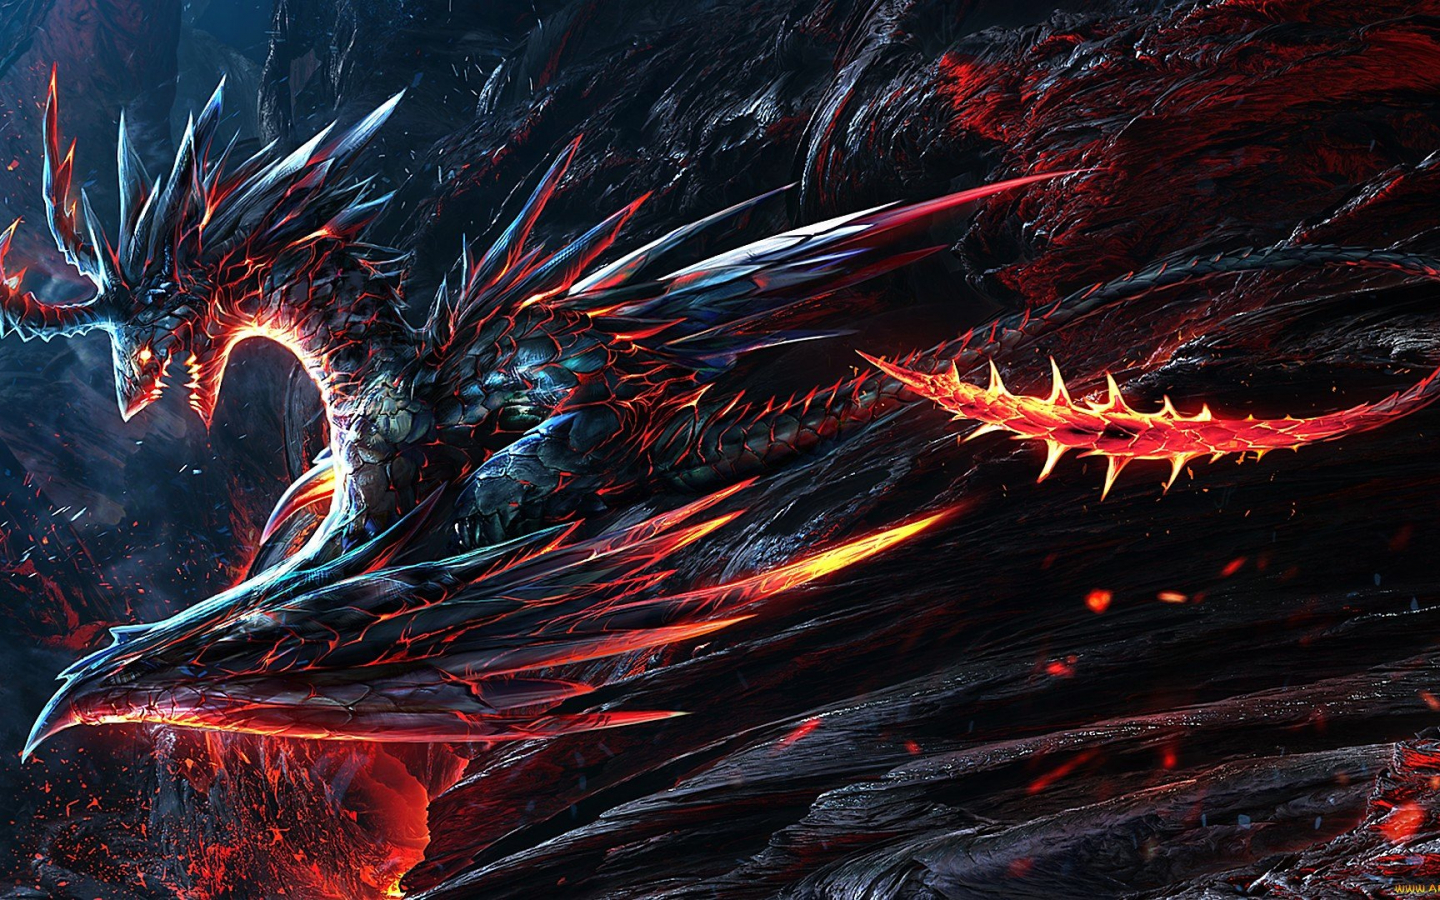 Free download Cover for the book Dragon Spirit RoyalRoadL [1920x1080] for your Desktop, Mobile & Tablet. Explore Awesome Dragon Background. Fire Dragon Wallpaper, HD Dragon Wallpaper, 3D Dragon Wallpaper Free